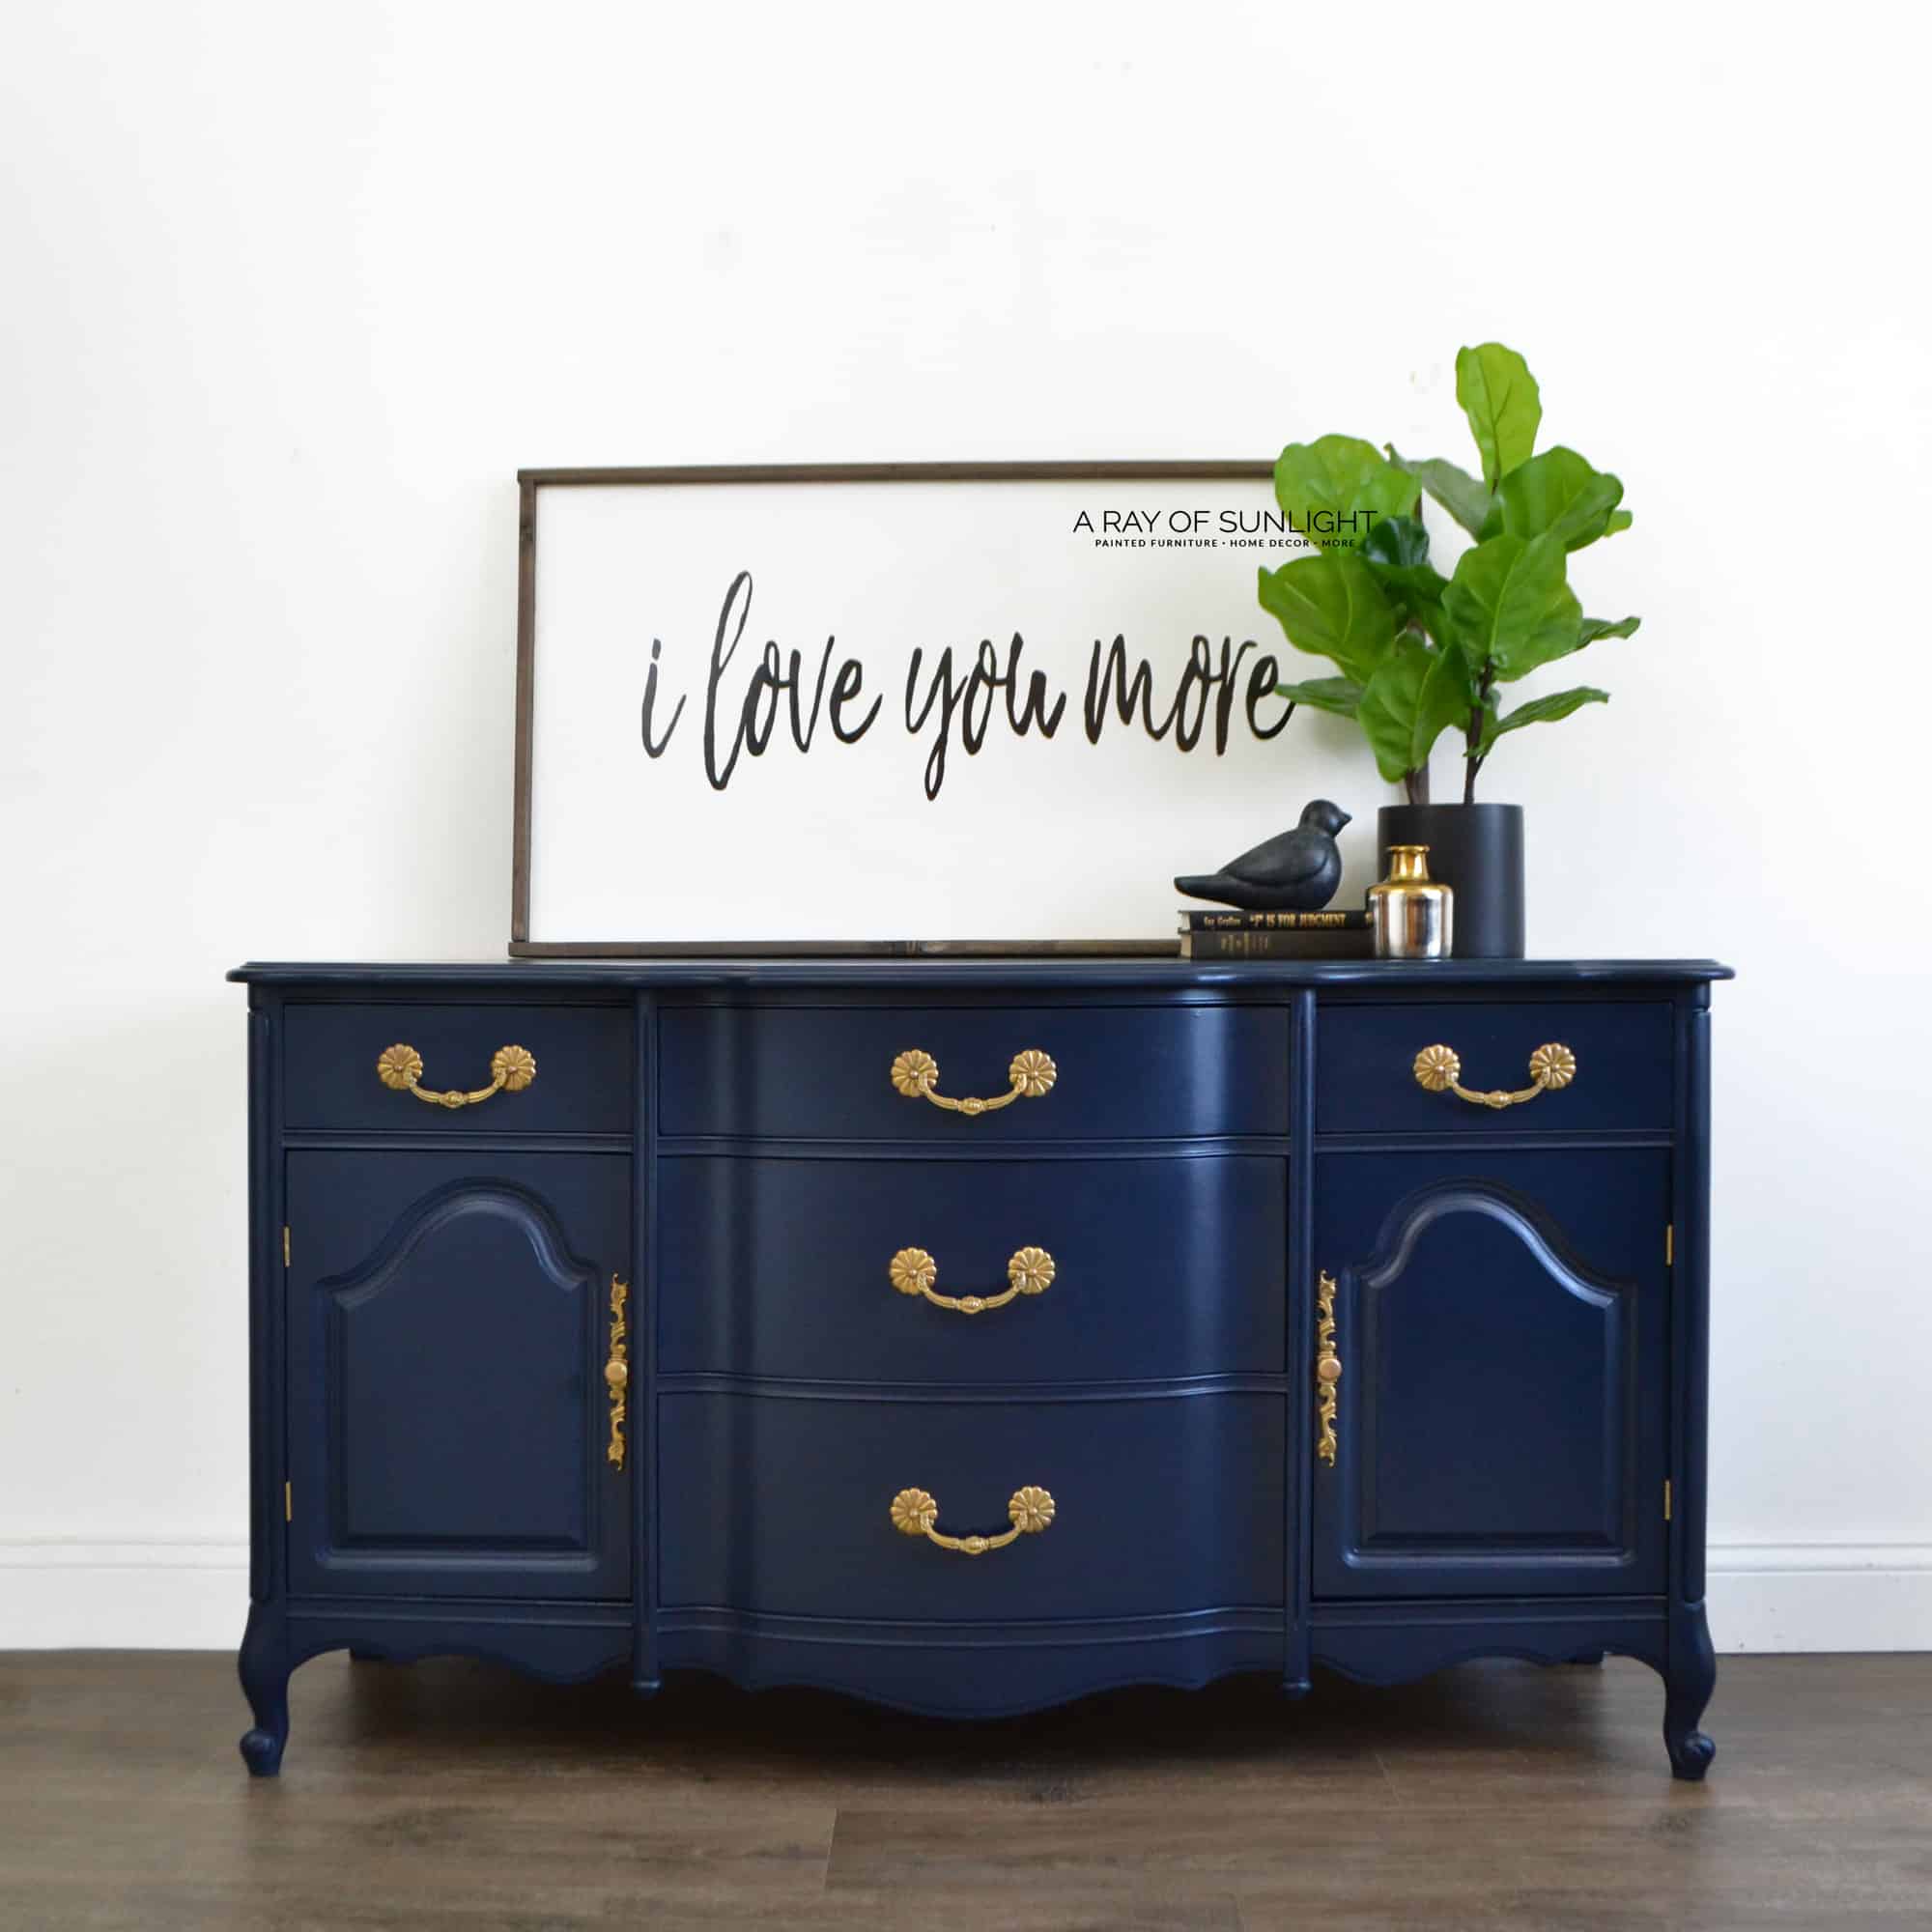 How to Paint Furniture with Chalk Paint